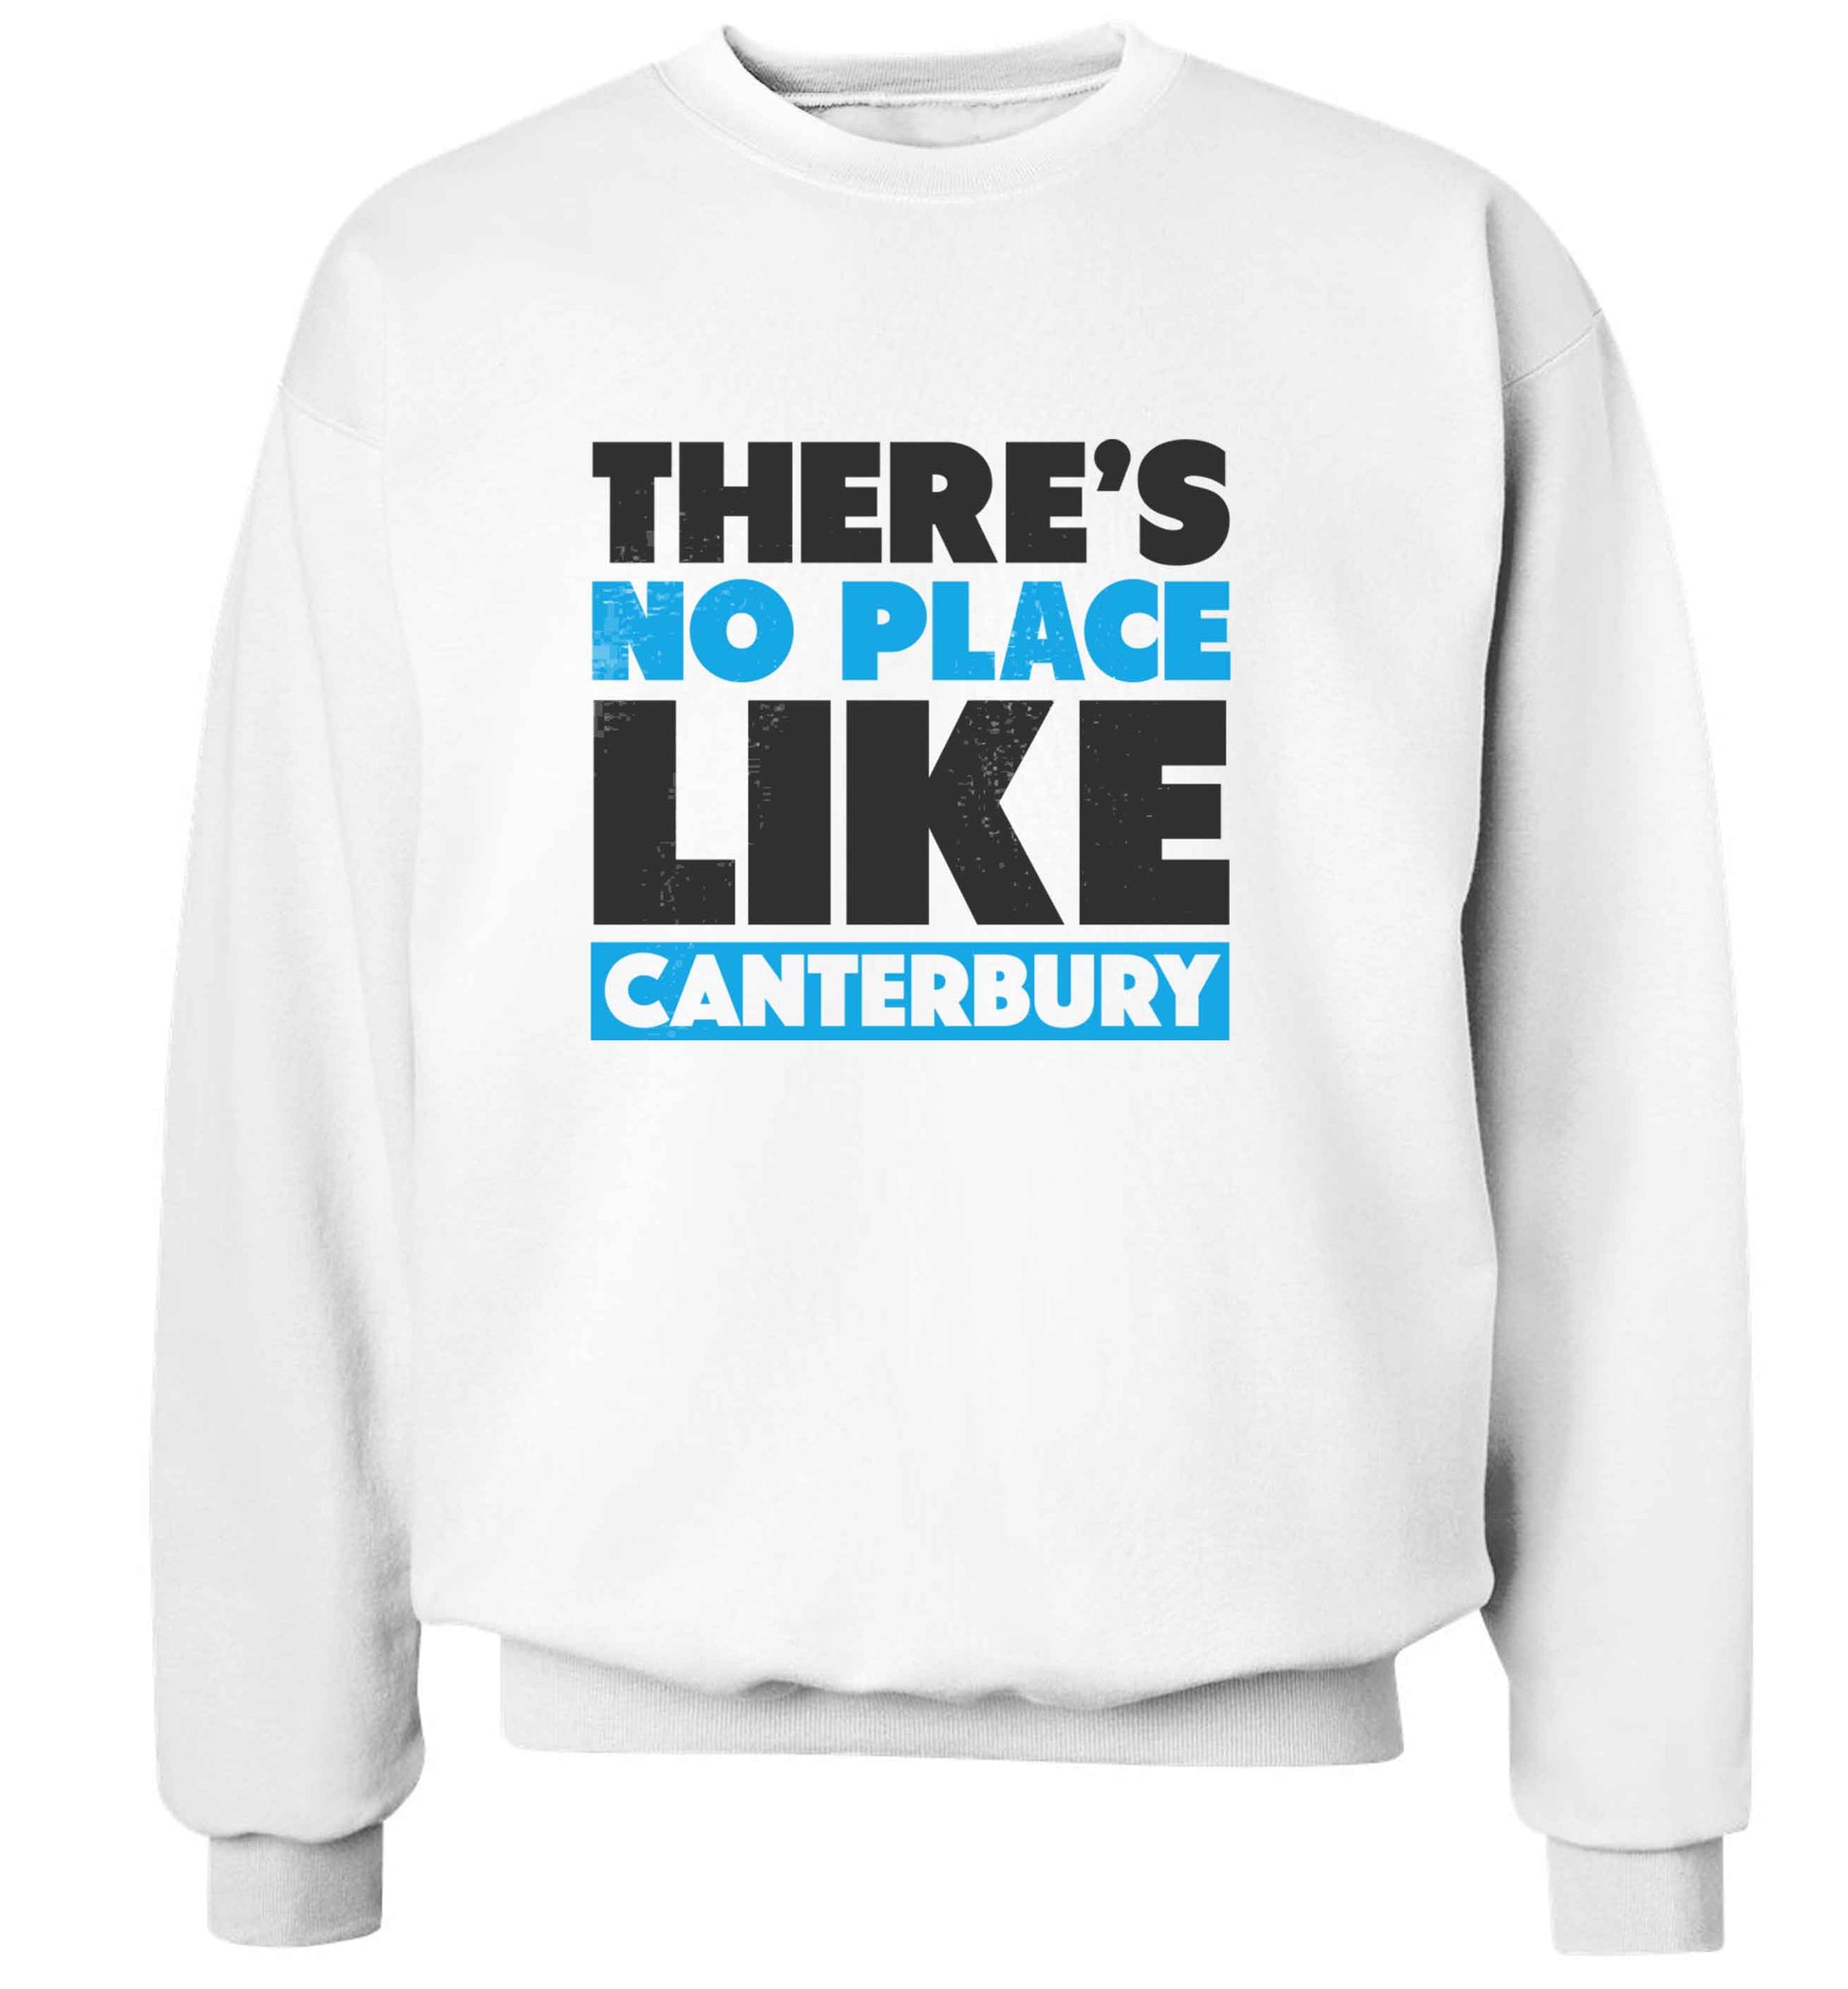 There's no place like Canterbury adult's unisex white sweater 2XL